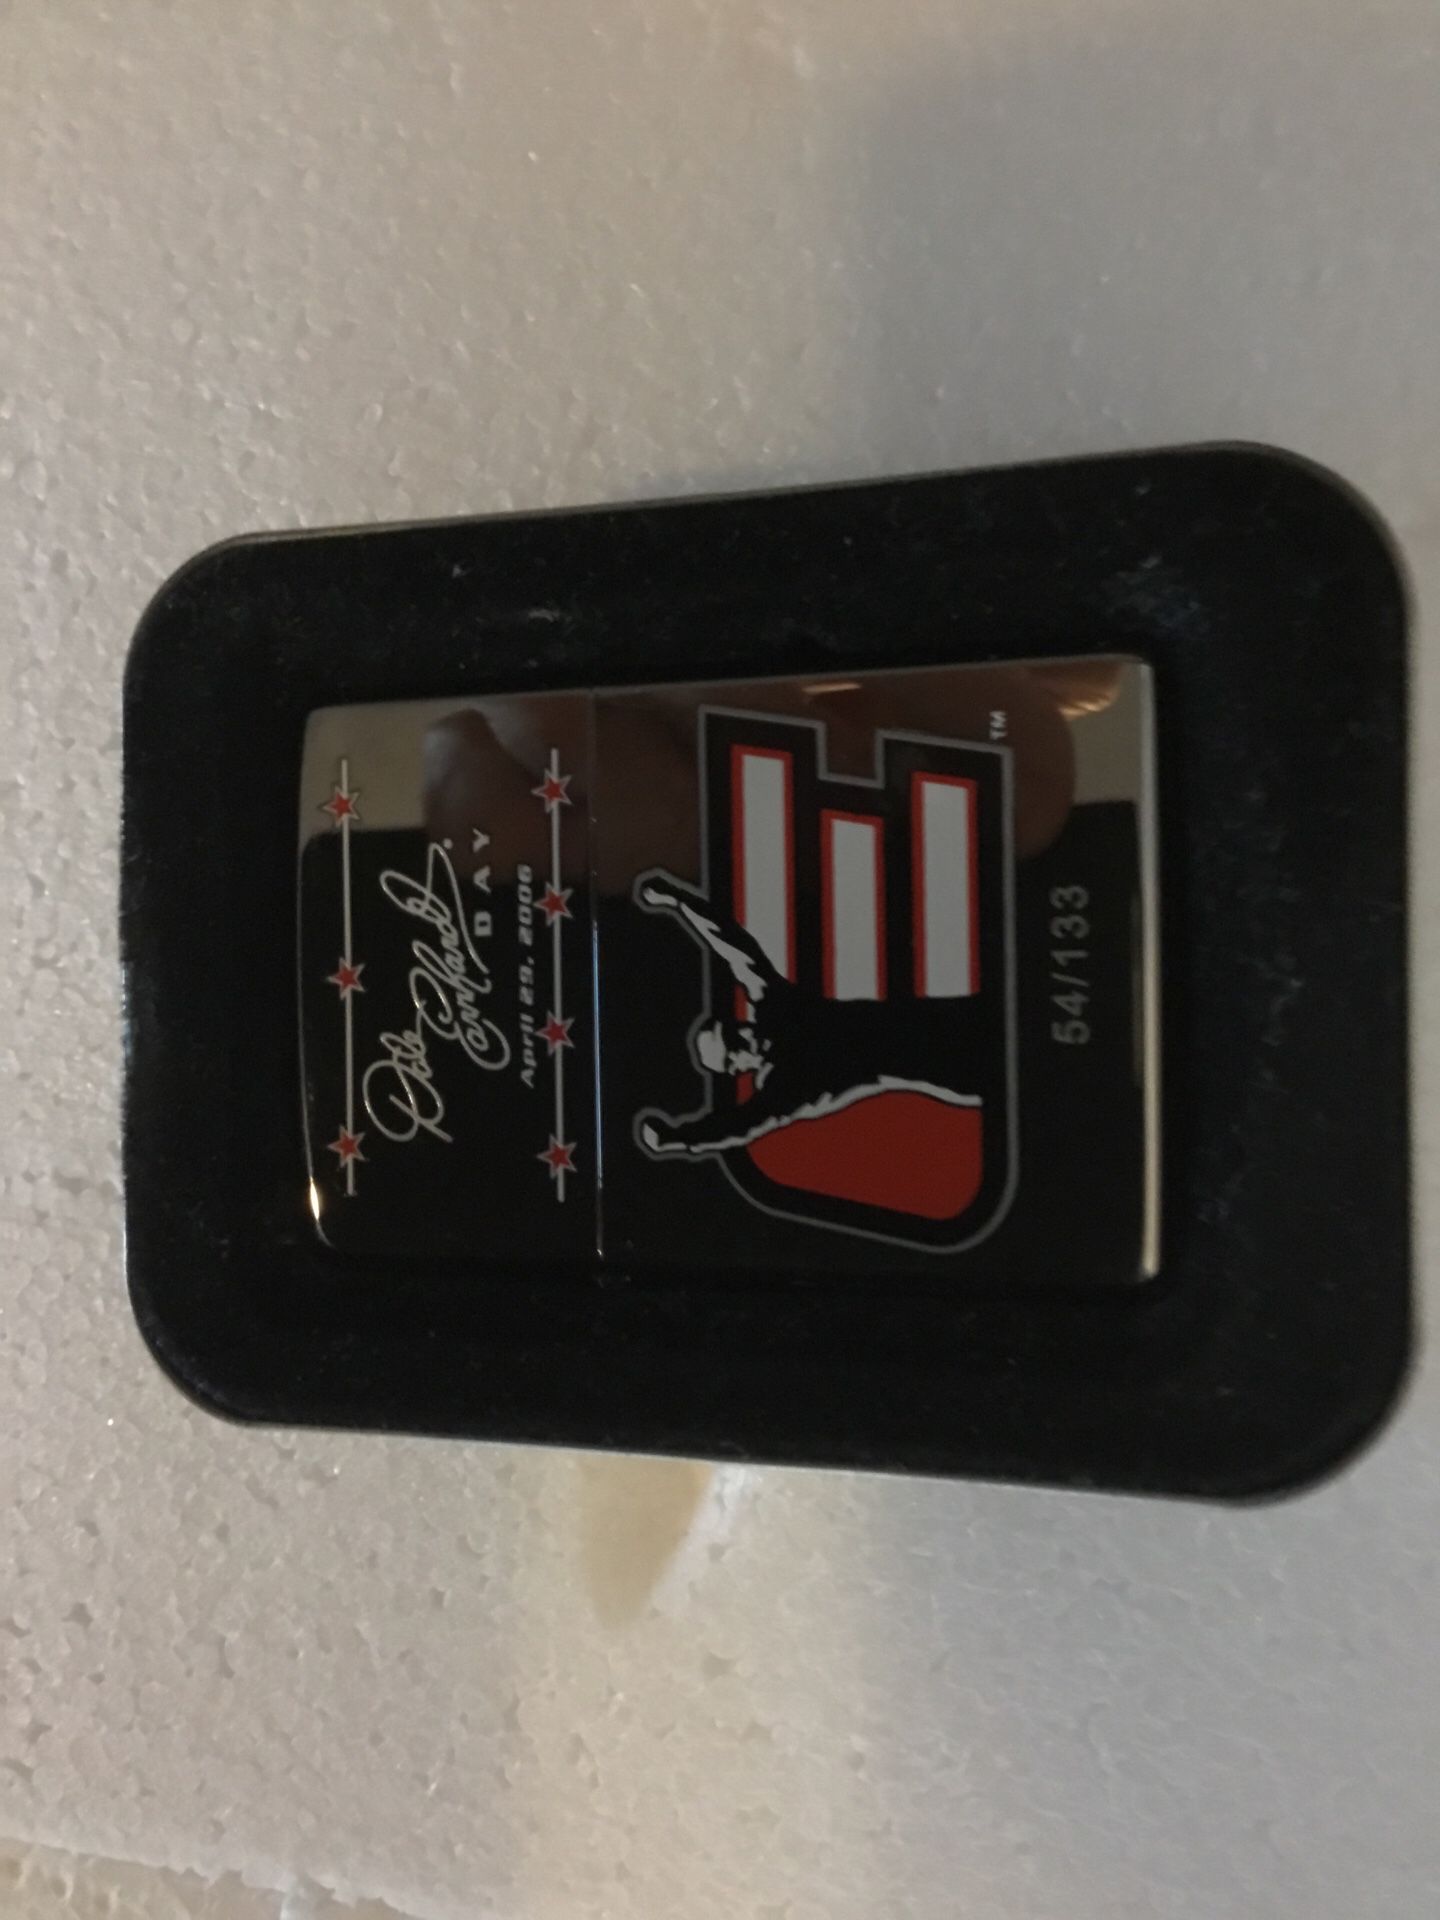 Nascar Dale Earnhardt Day Zippo lighter very rare this one is54/133